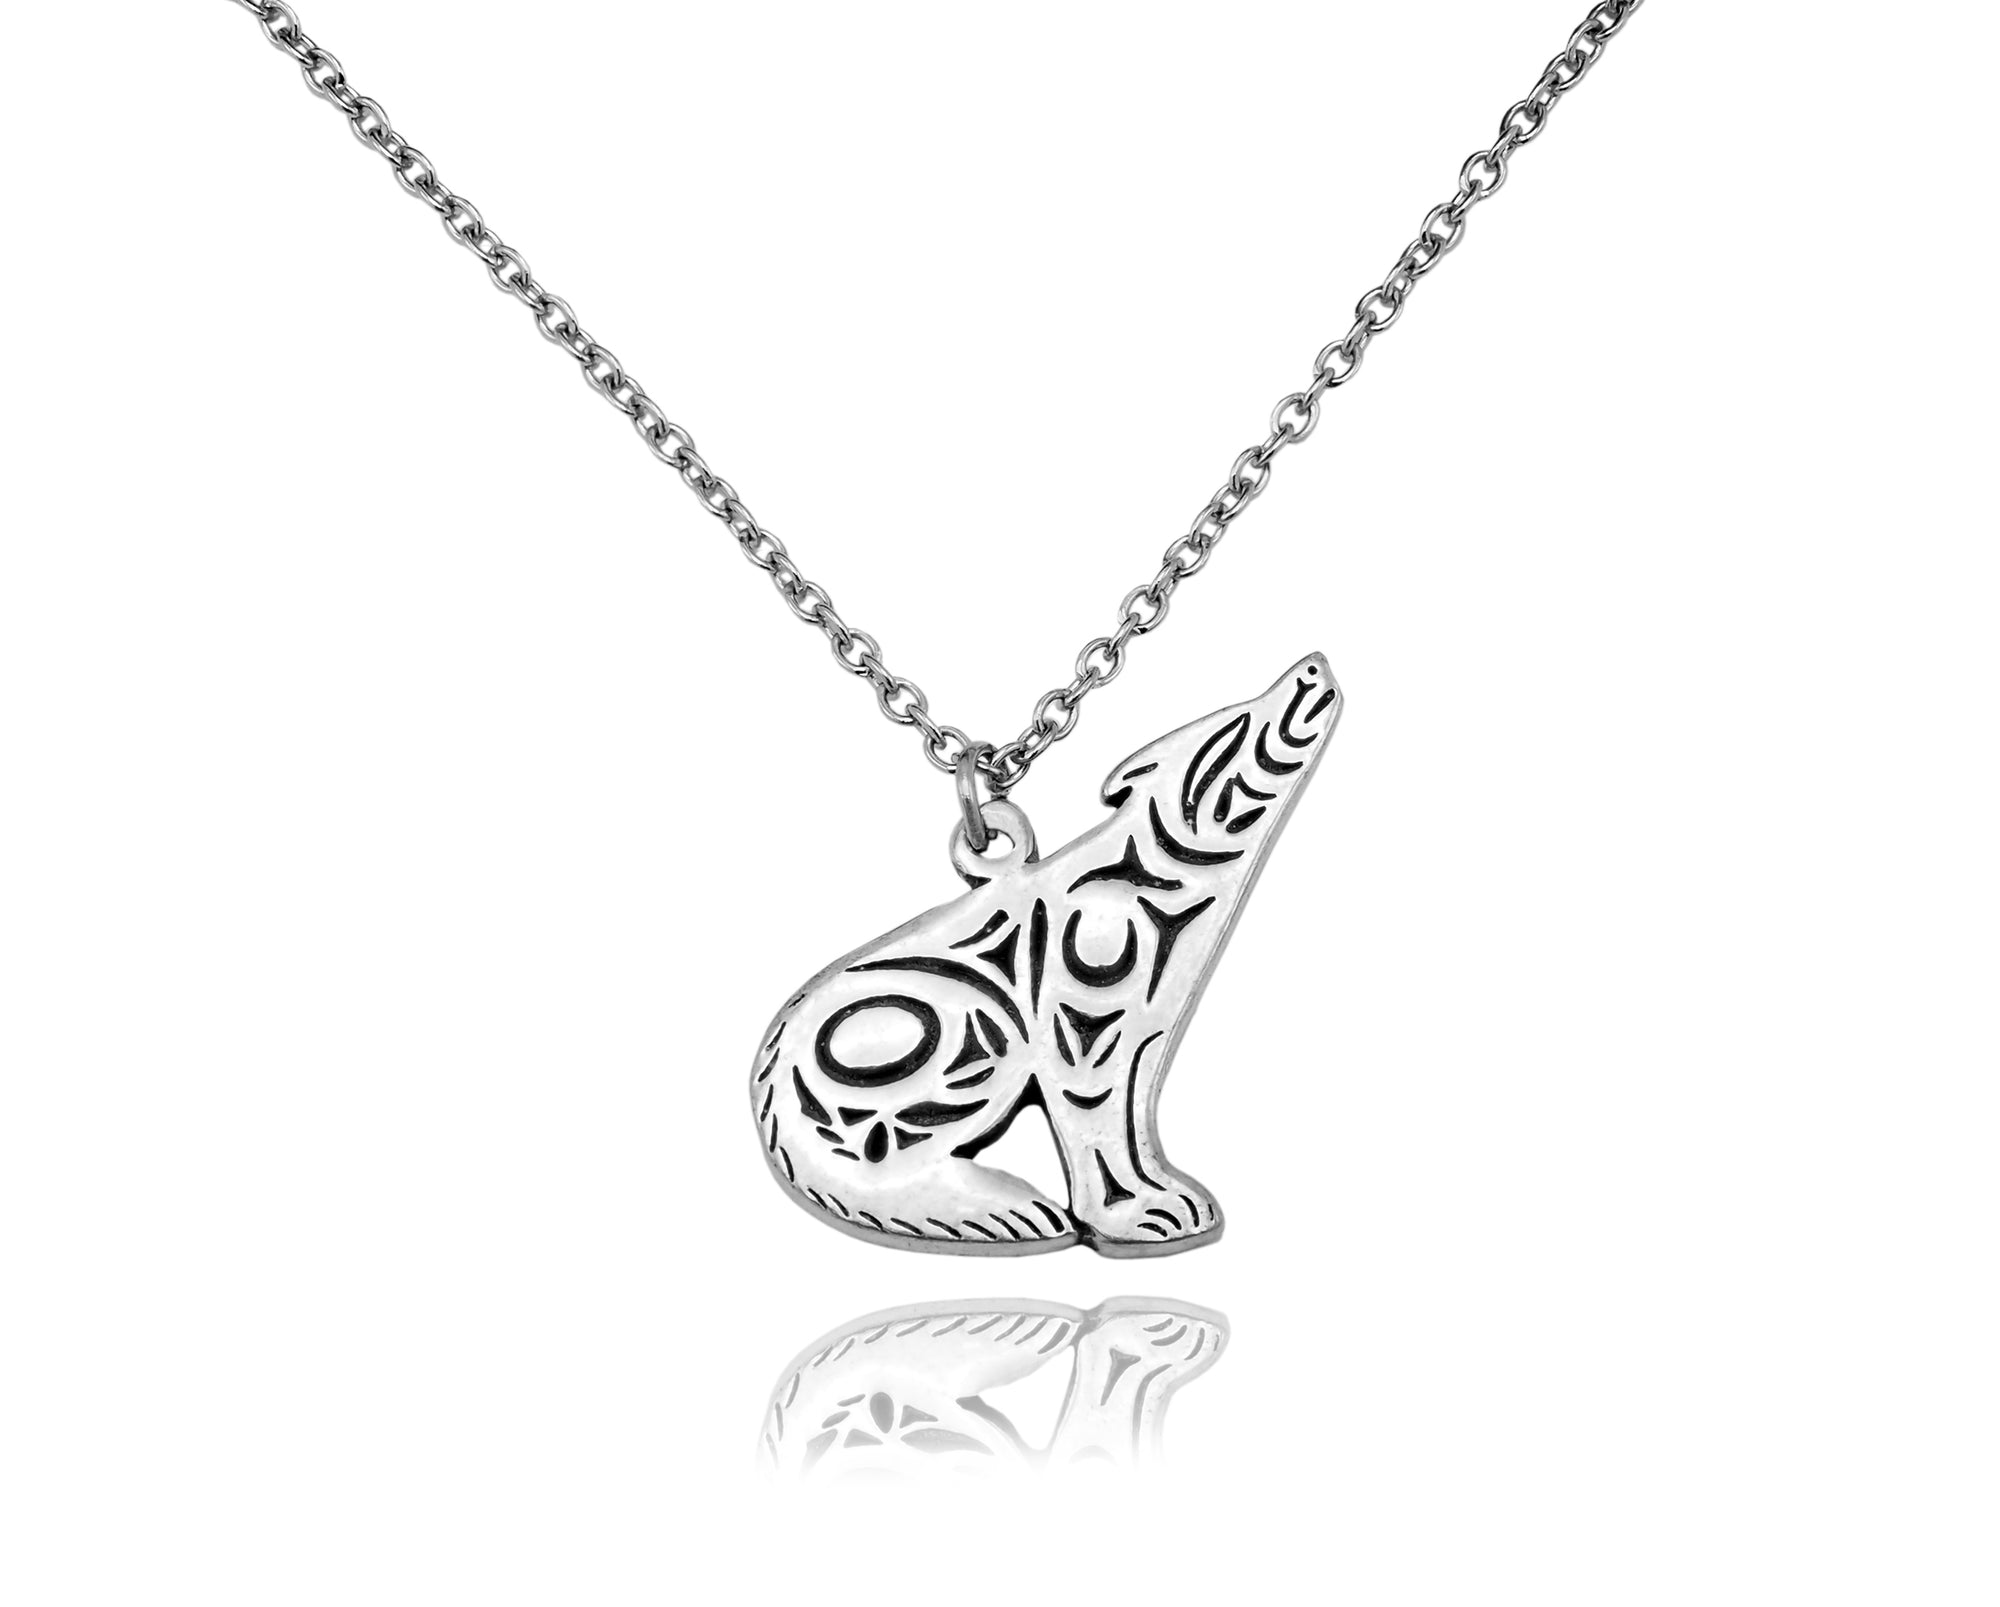 Details more than 208 aphmau wolf necklace best